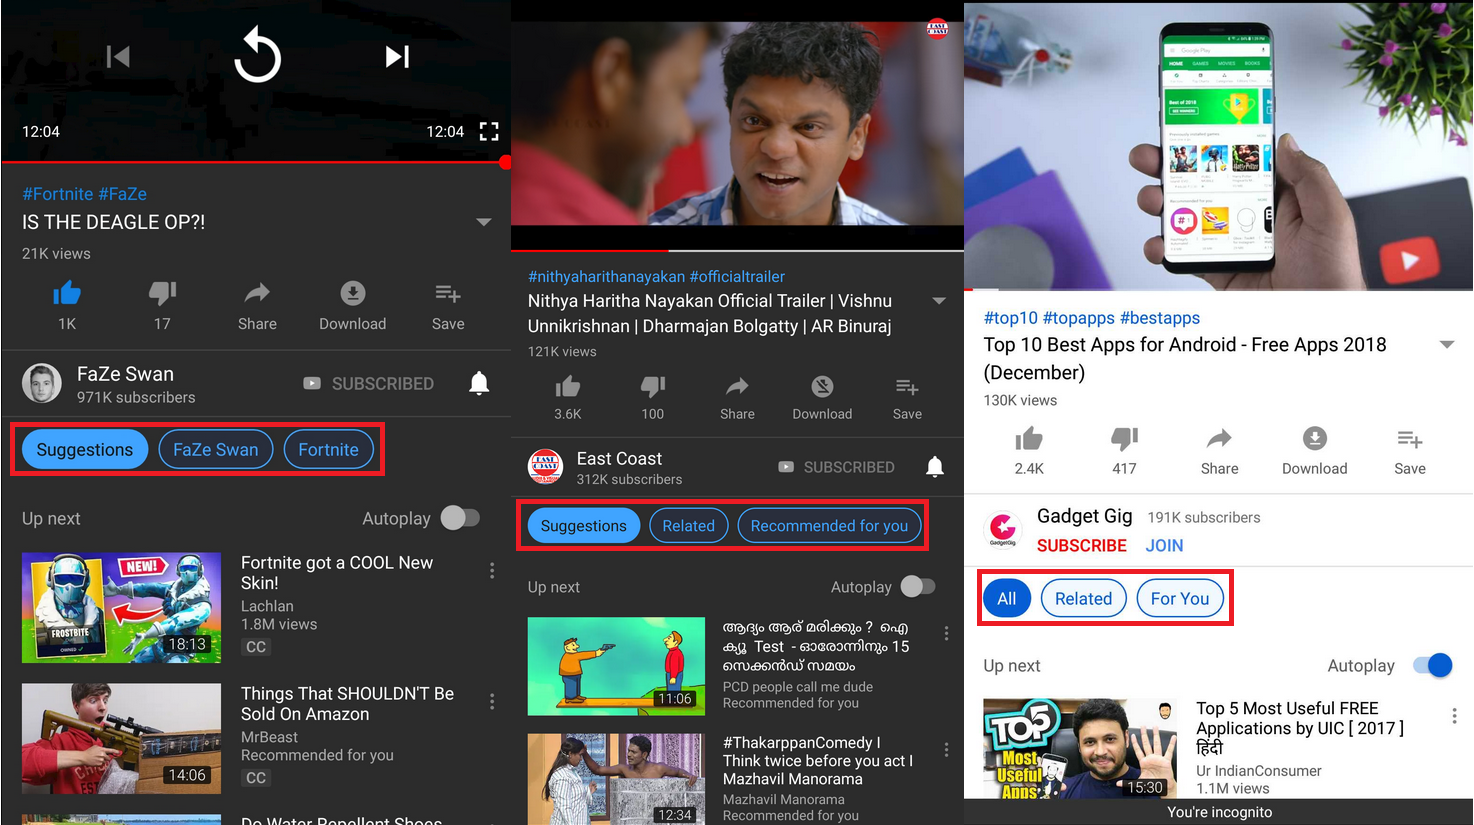 YouTube tests a way for users to have control over the Up next column - YouTube test gives users more control over the videos that will be autoplayed next